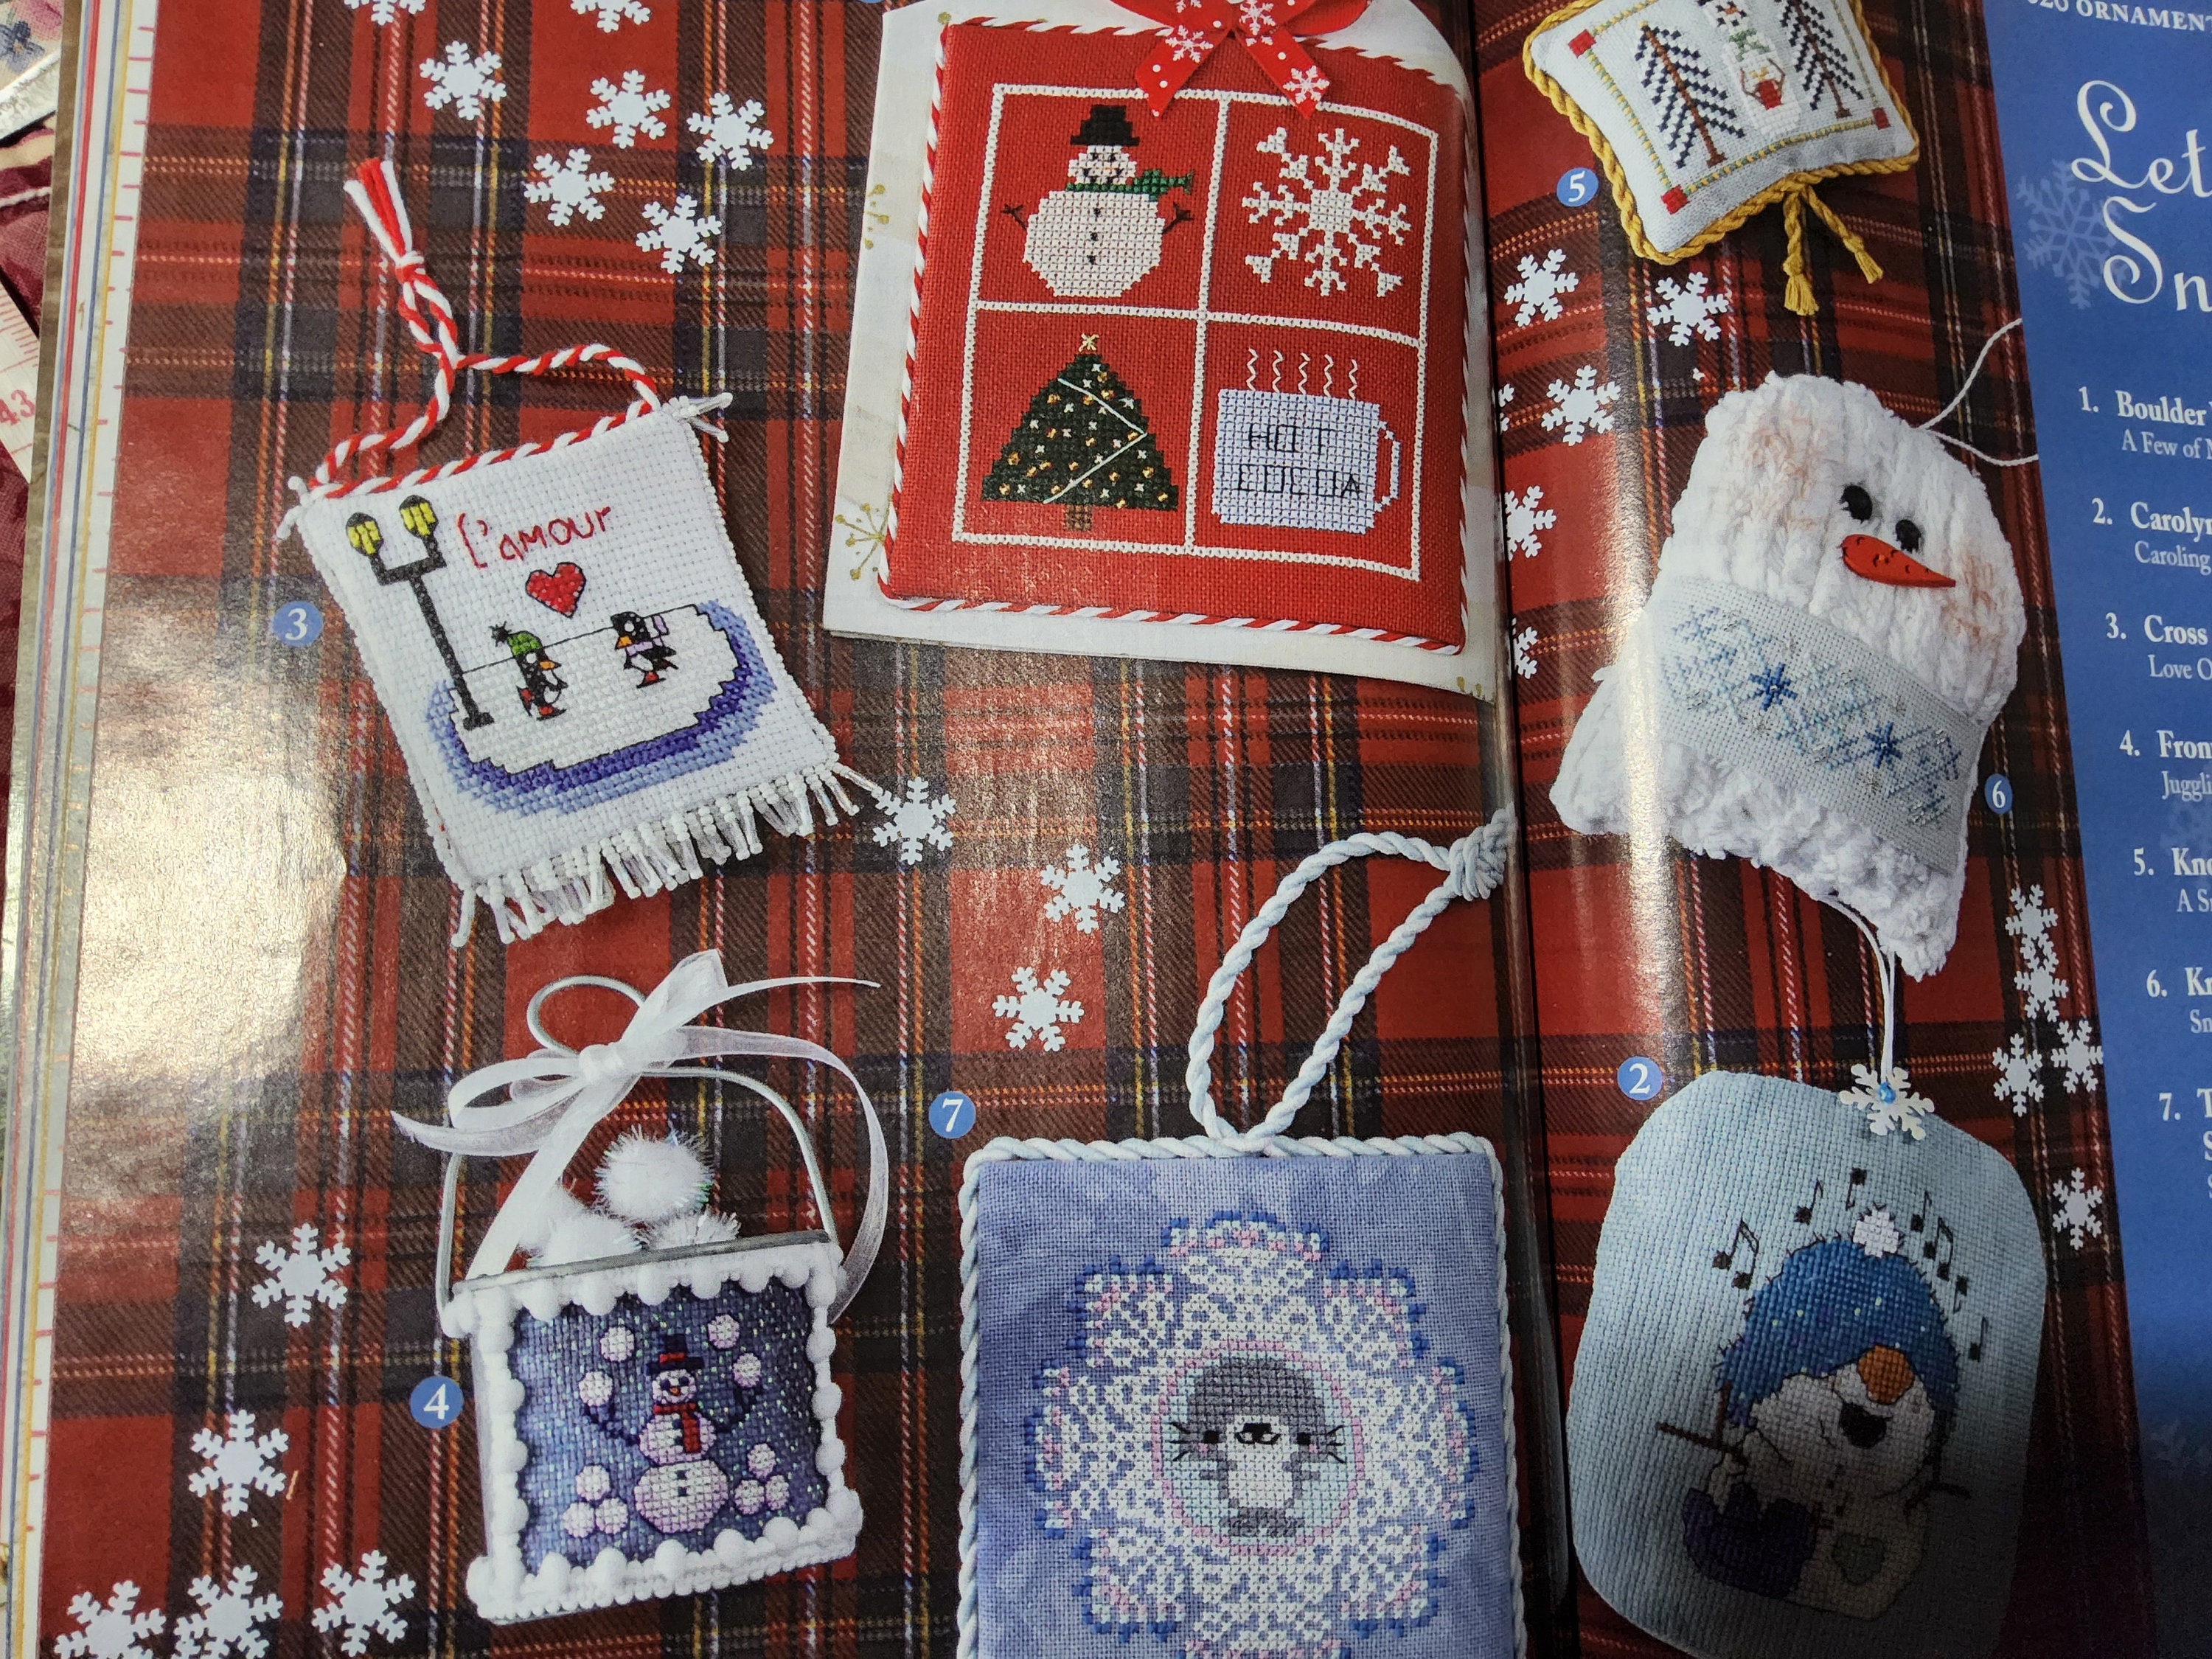 Just Cross Stitch 2020 Christmas Ornament Special Holiday Issue